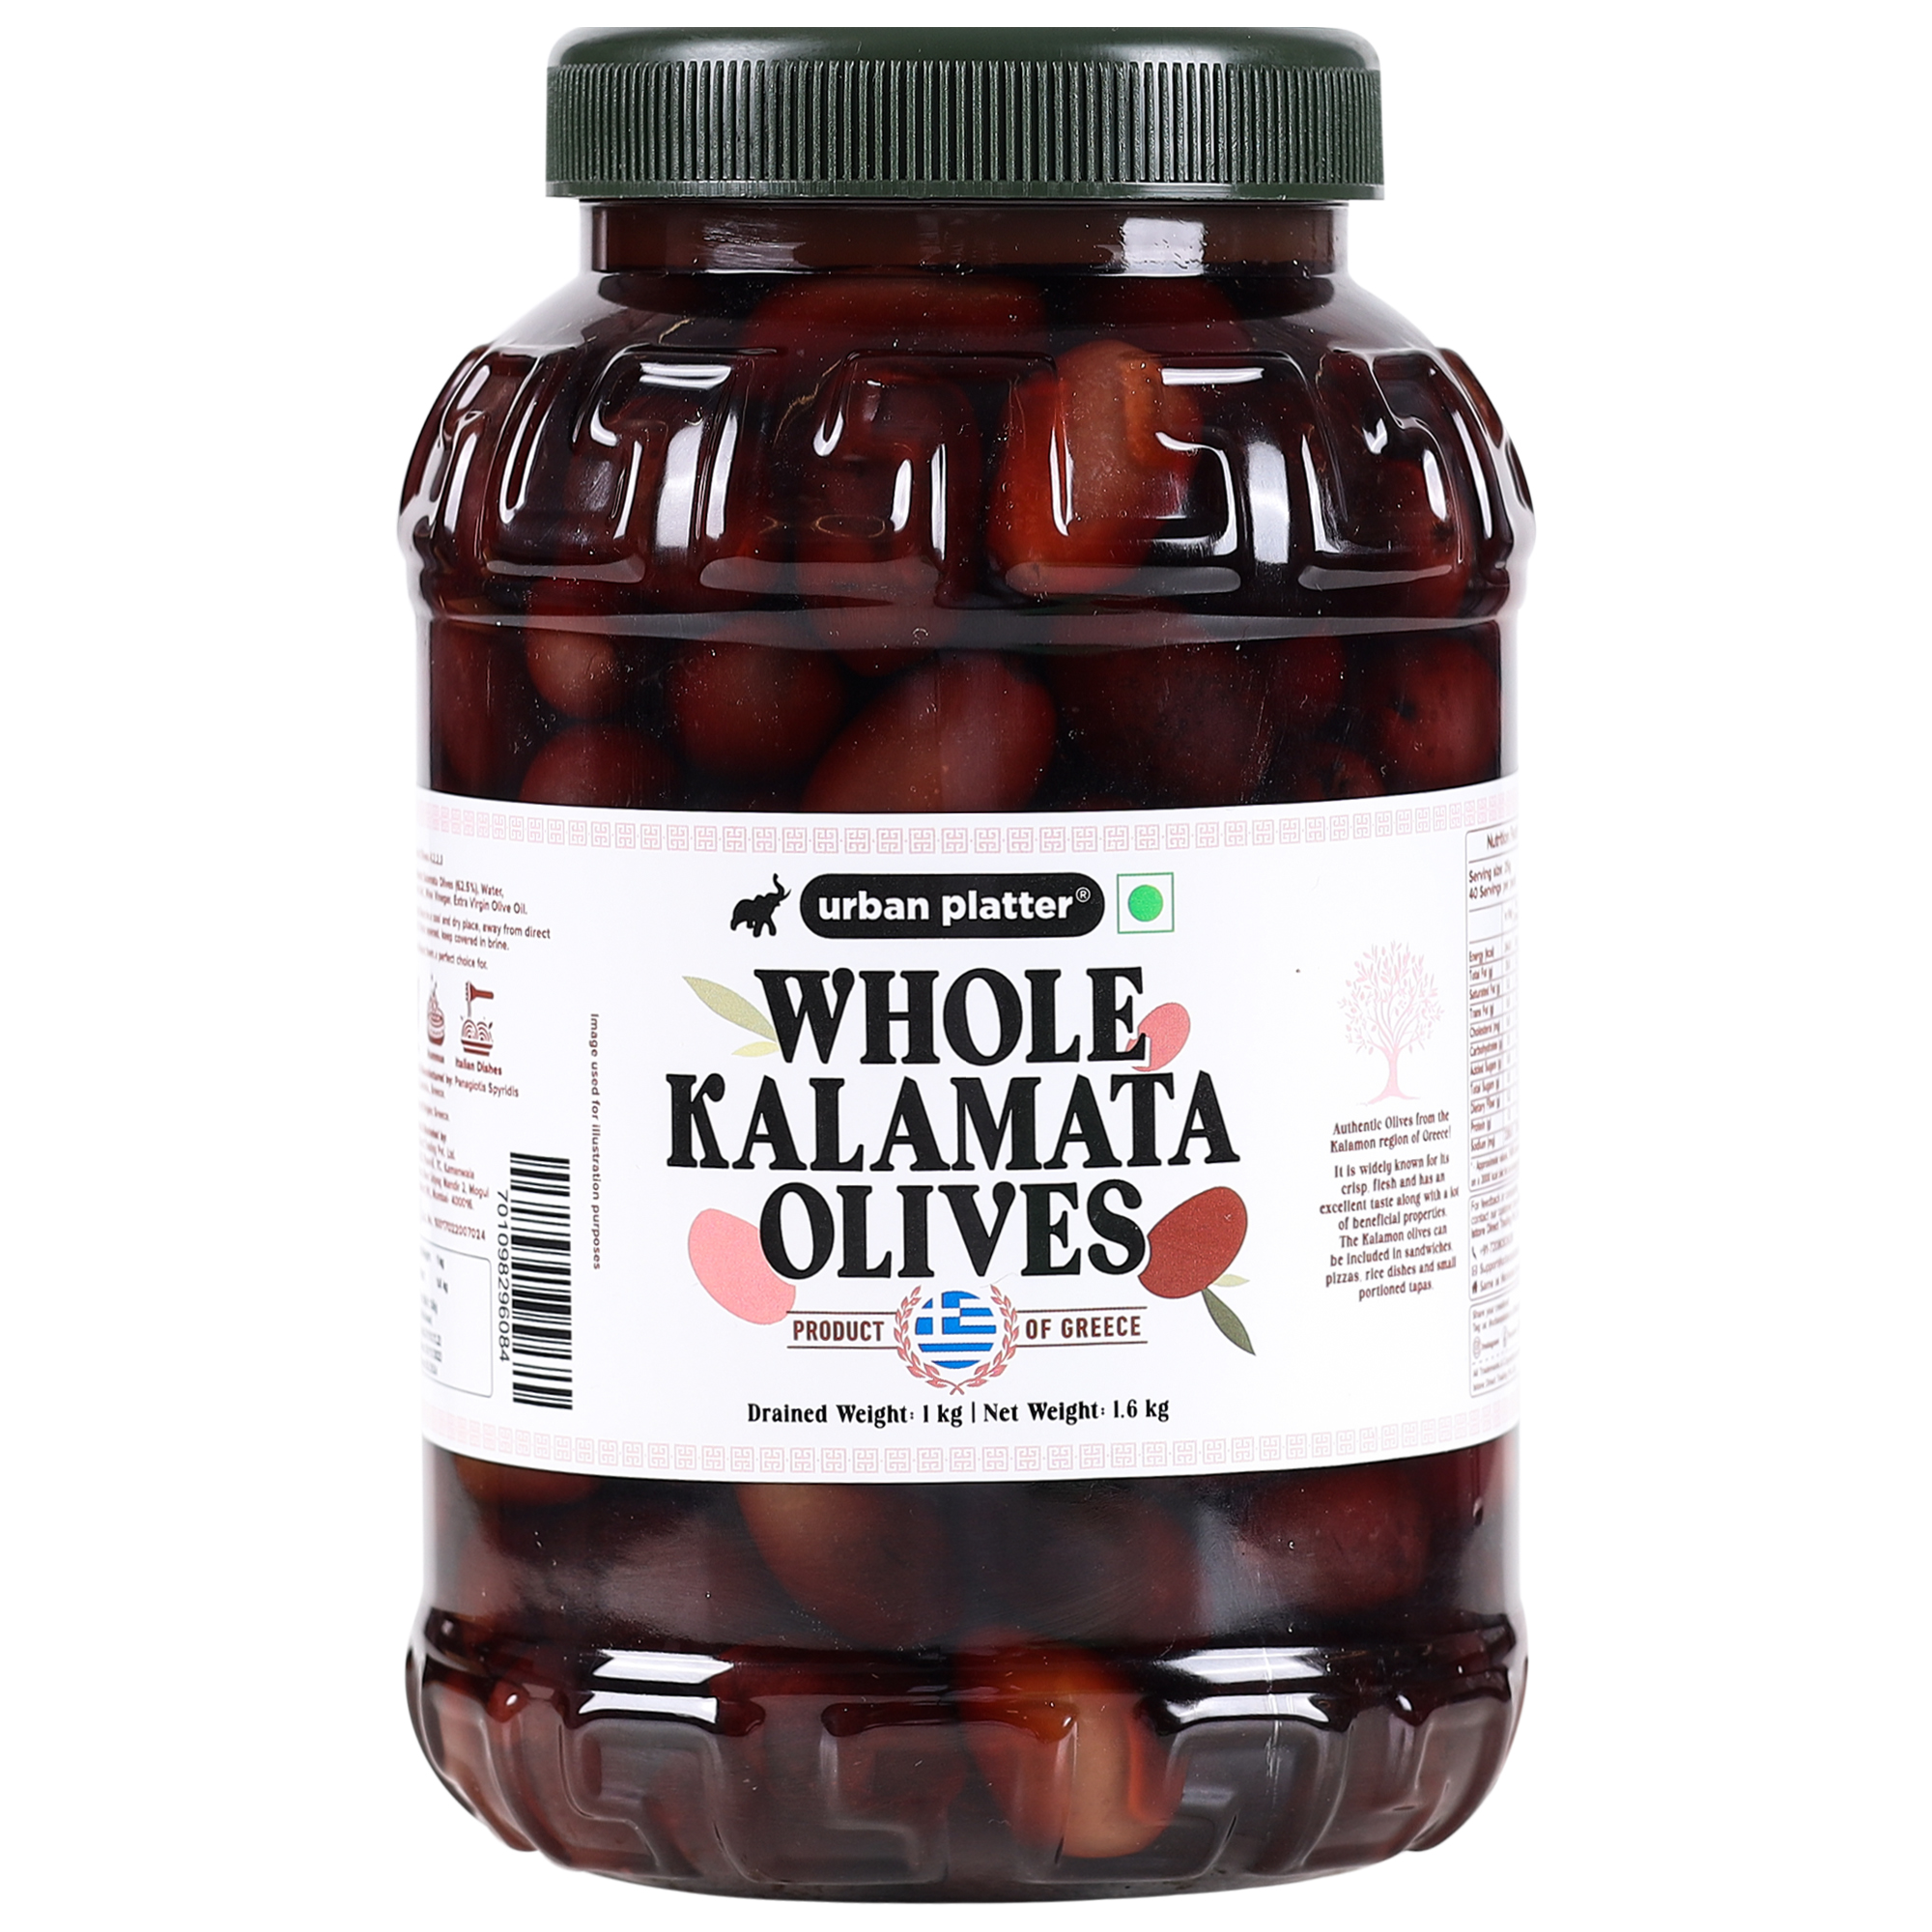 Urban Platter Whole Green Gordal Olives Pitted, 3.8kgs (Product of Spain, Large Size Olive Without Pits, Firm & Juicy